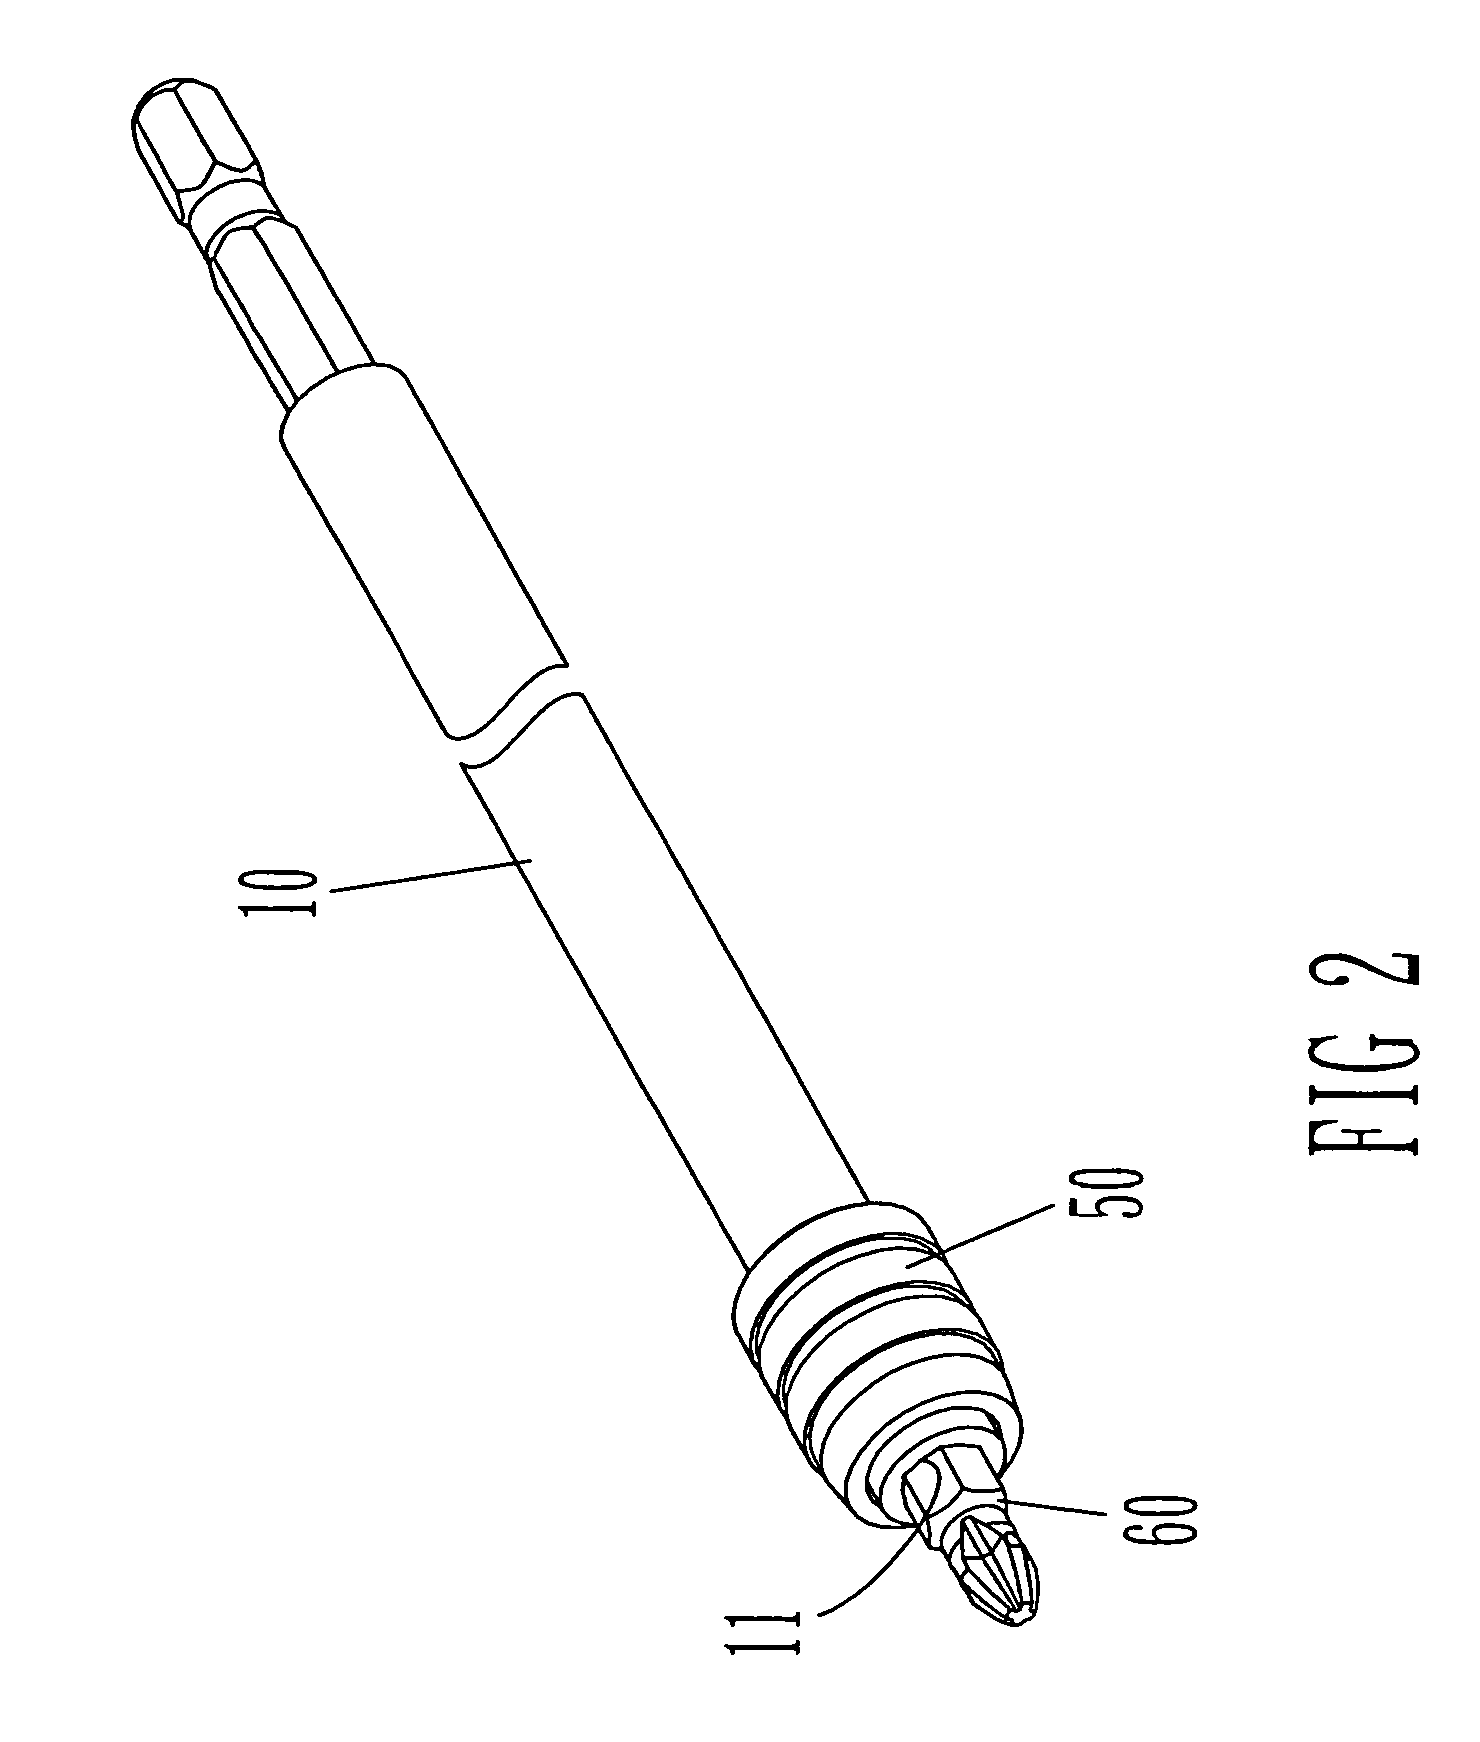 Device for locking and releasing a screw bit